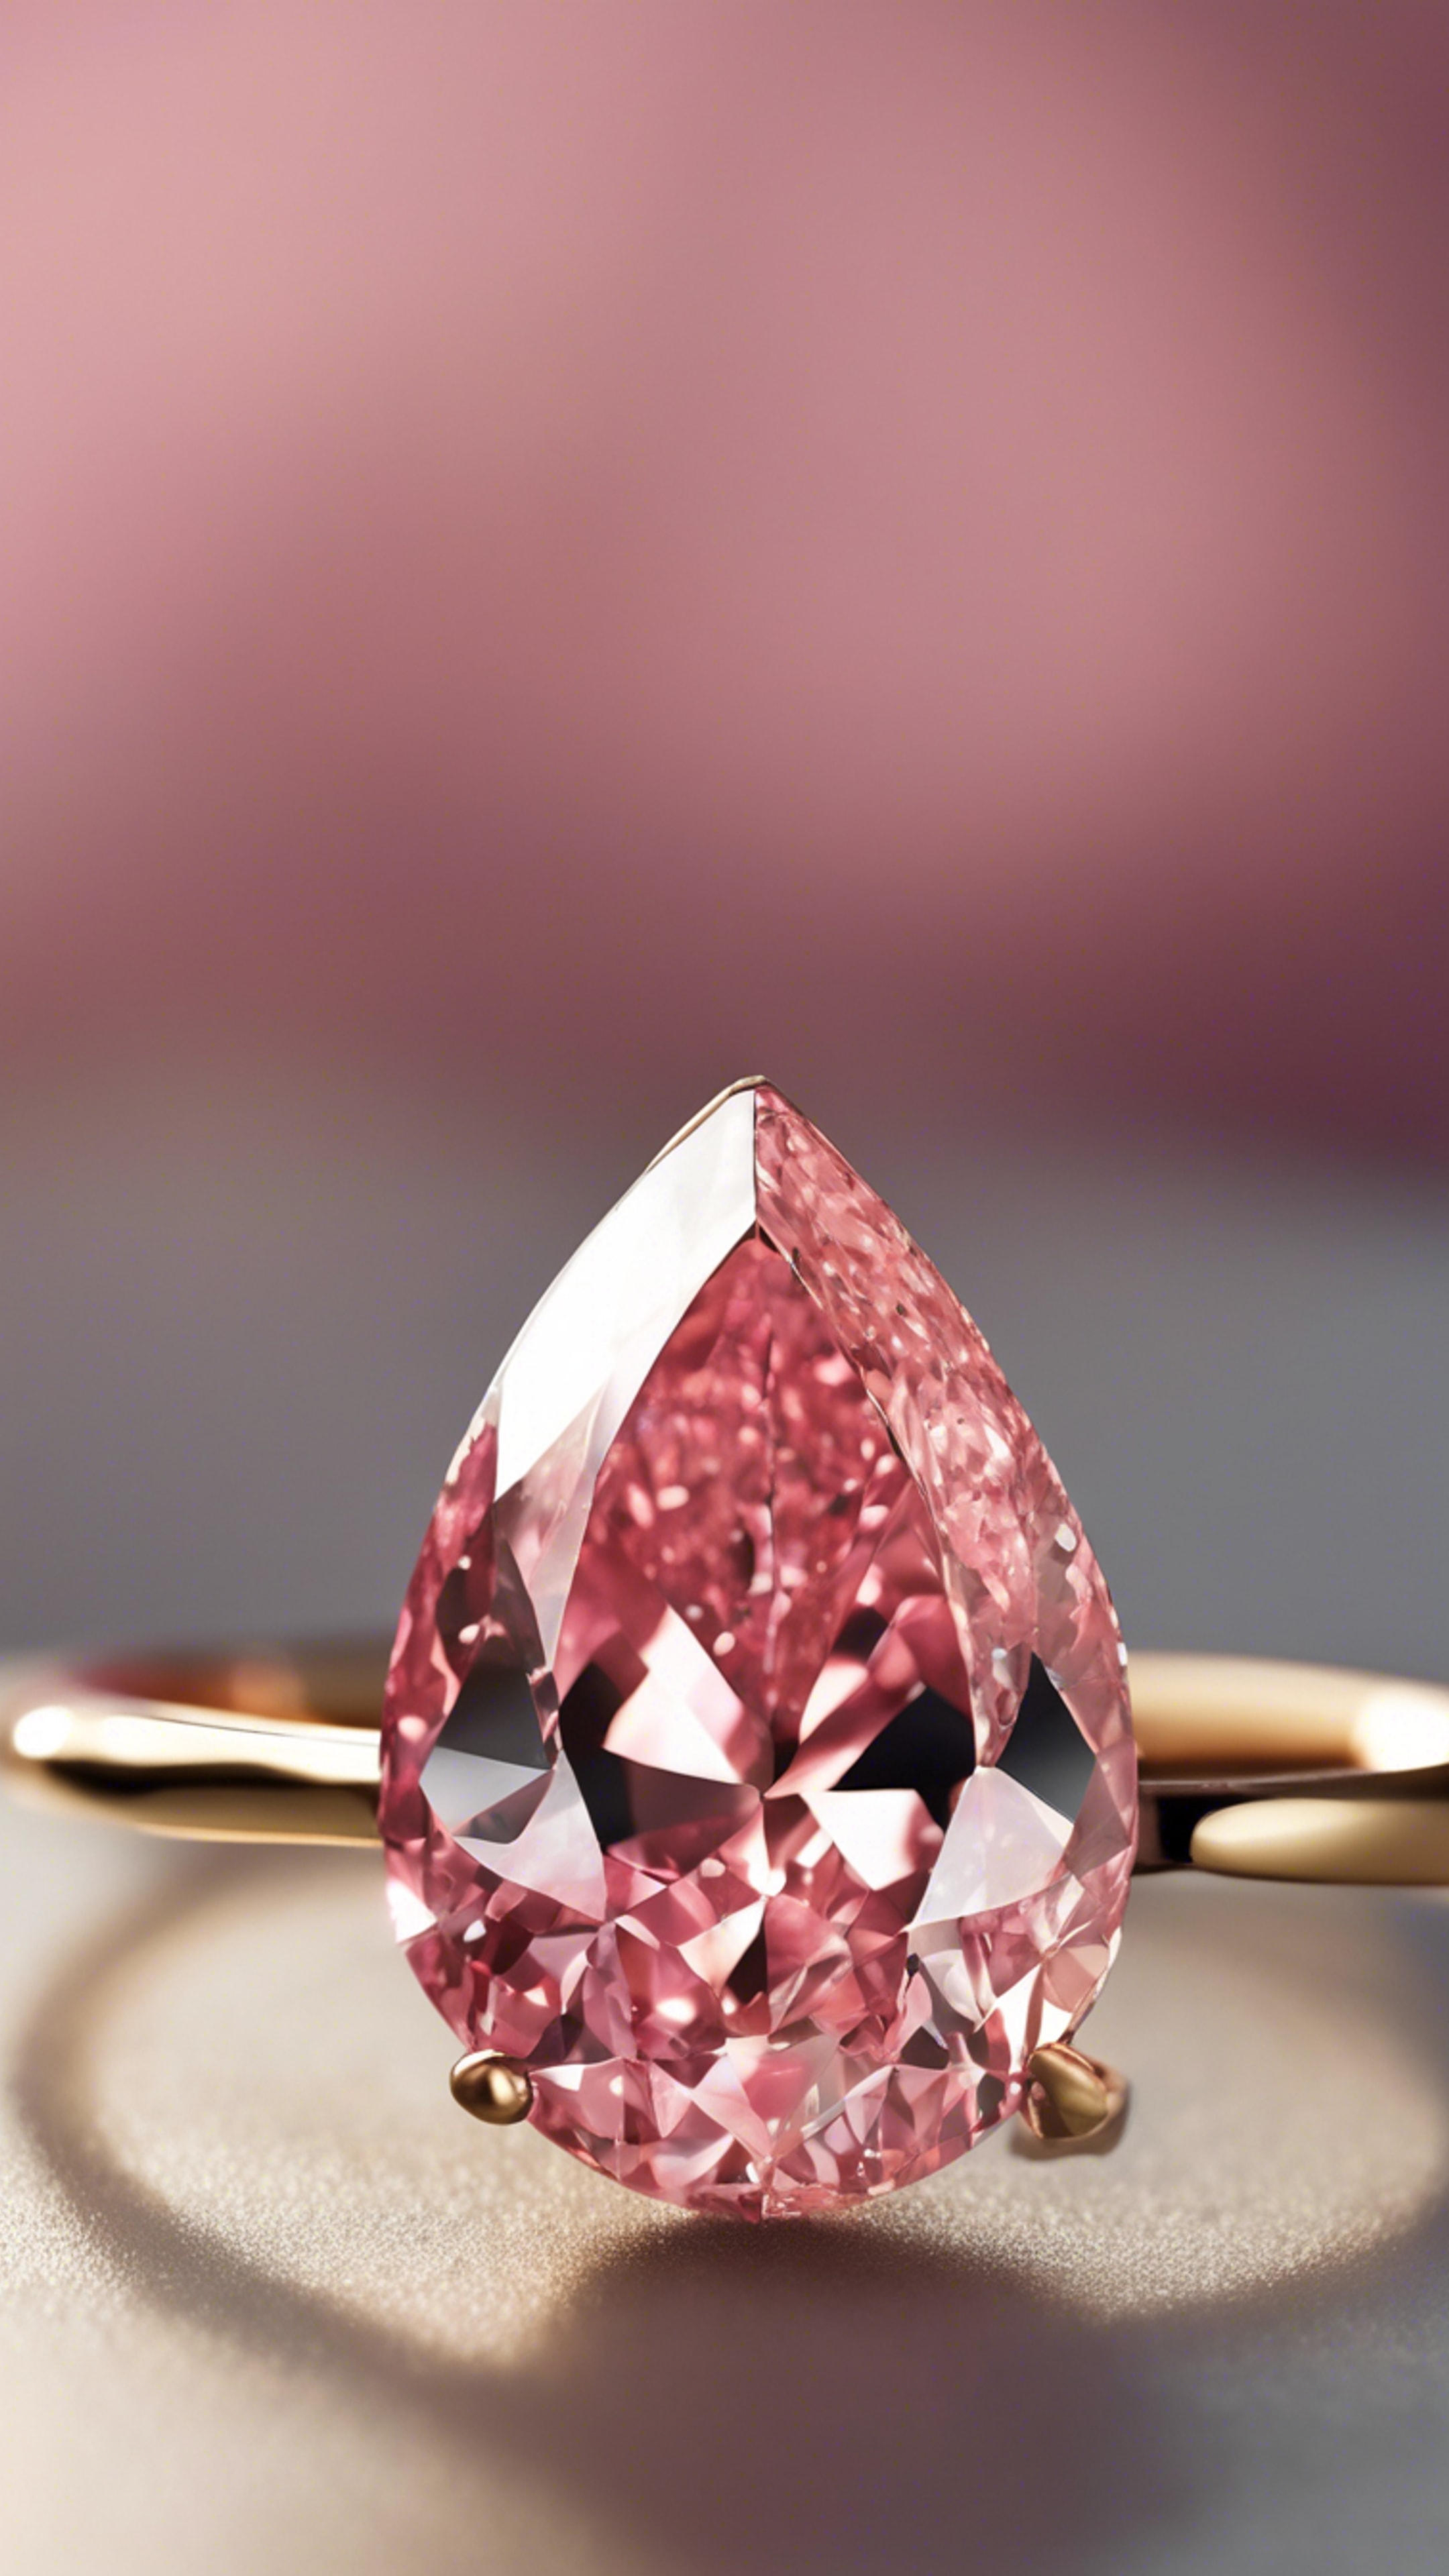 A close-up of a pink pear-shaped diamond on a simple gold band. 벽지[930f75676b4b4a58983f]